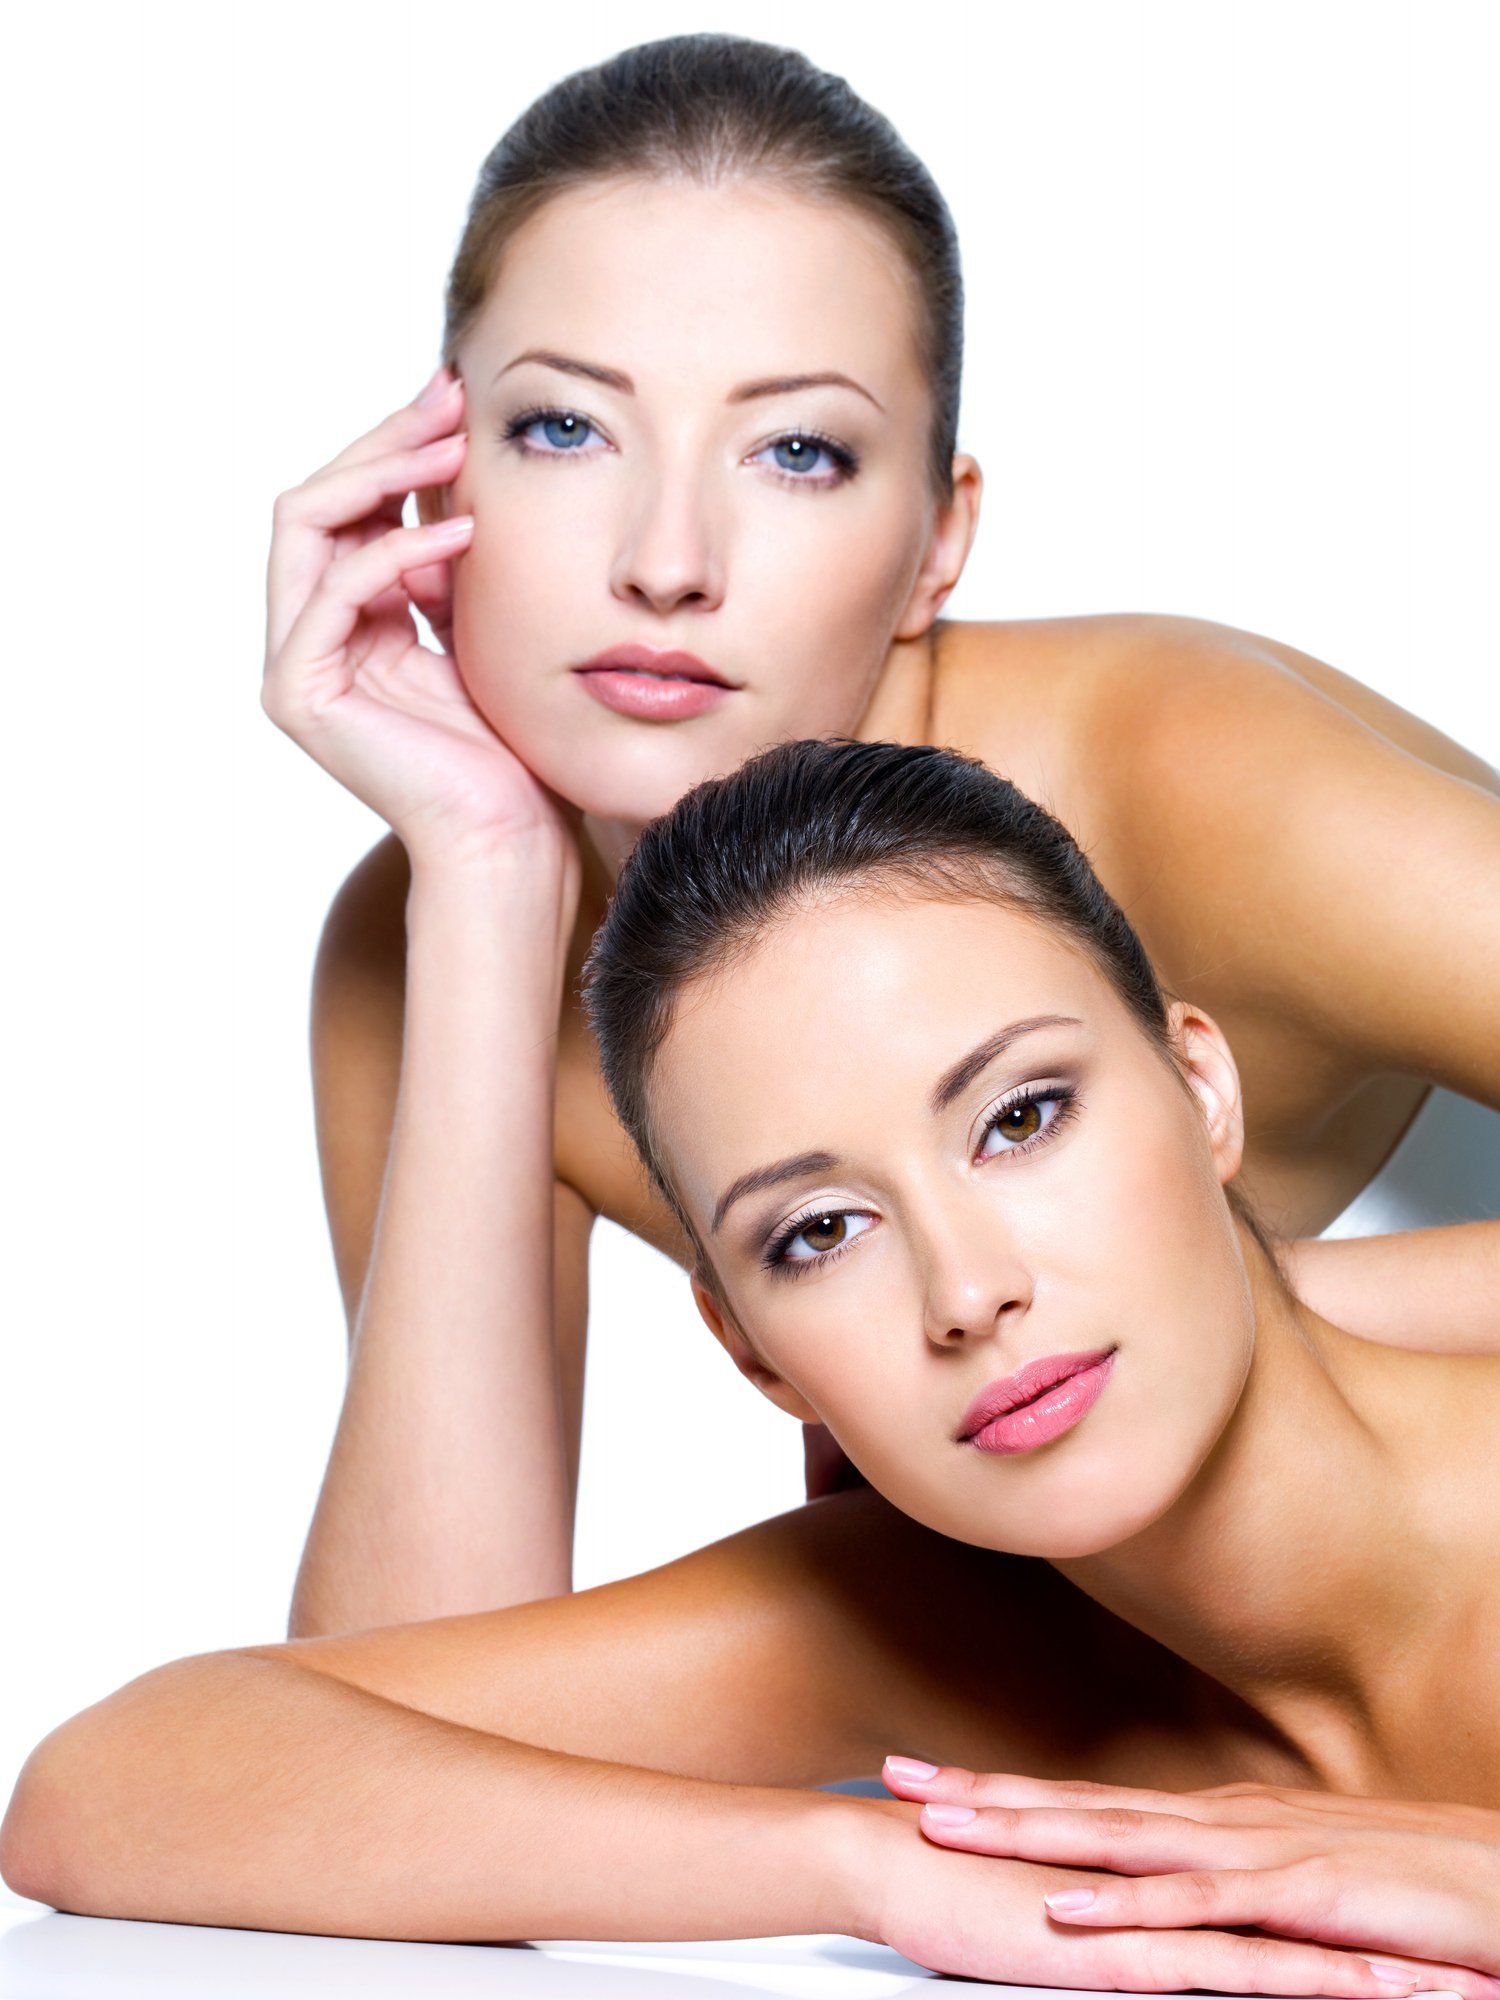 Women who received collagen induction therapy from Hot Springs Surgery and Vein